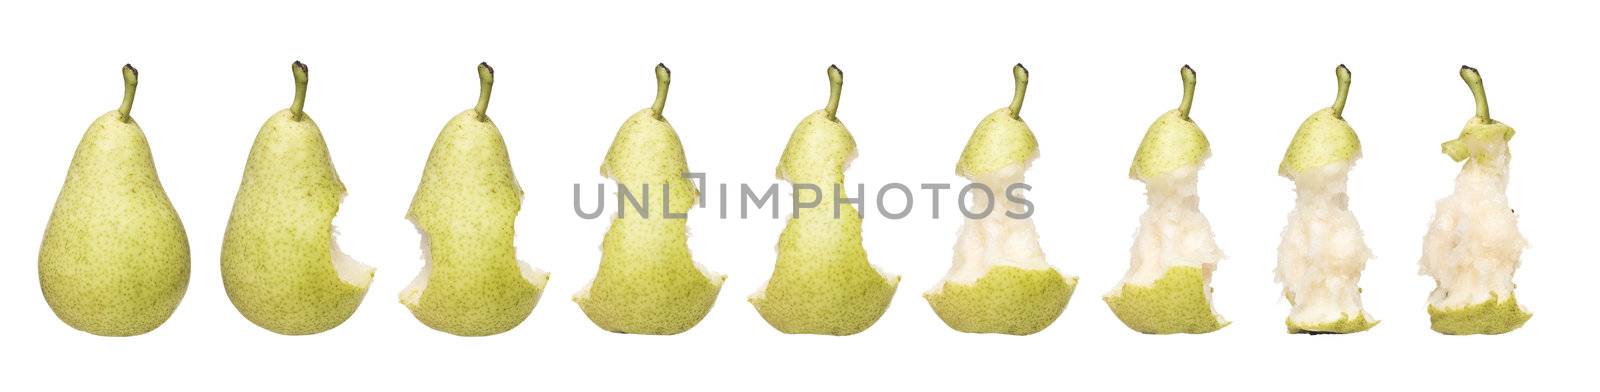 Pear Time Lapse by gemenacom